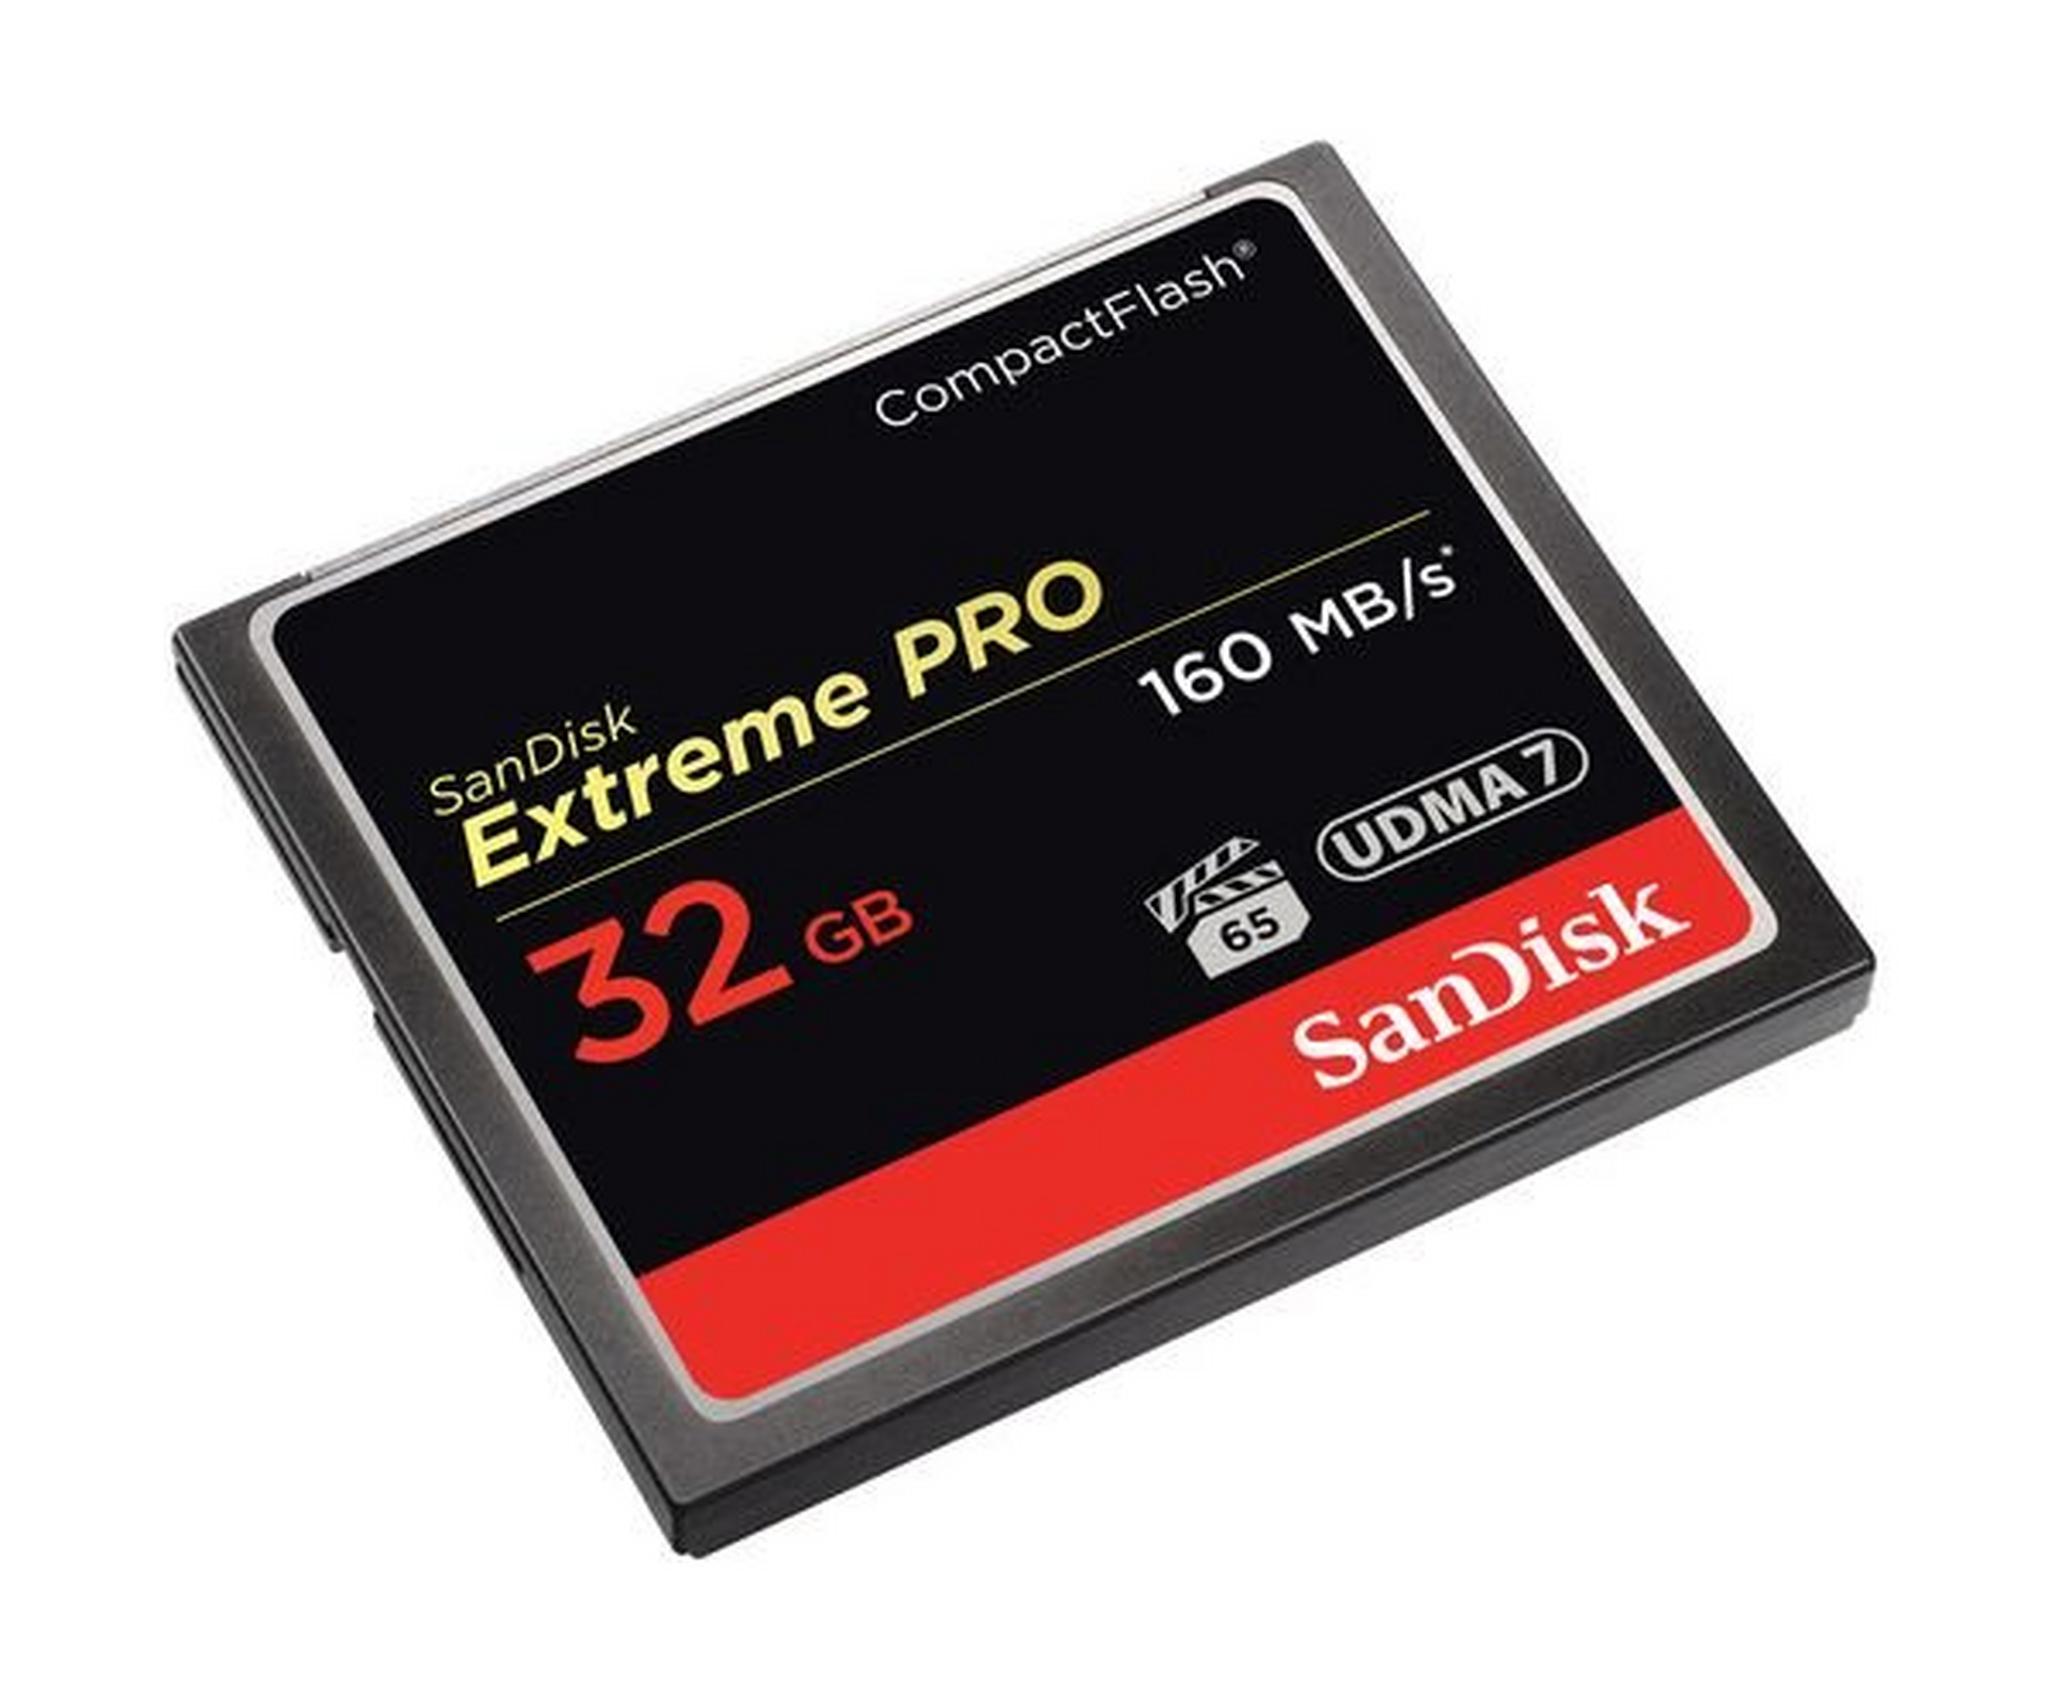 SanDisk 32GB 160MB/s Extreme Pro Compact Flash Memory Card (SDCFXPS-032G-X46 XP)